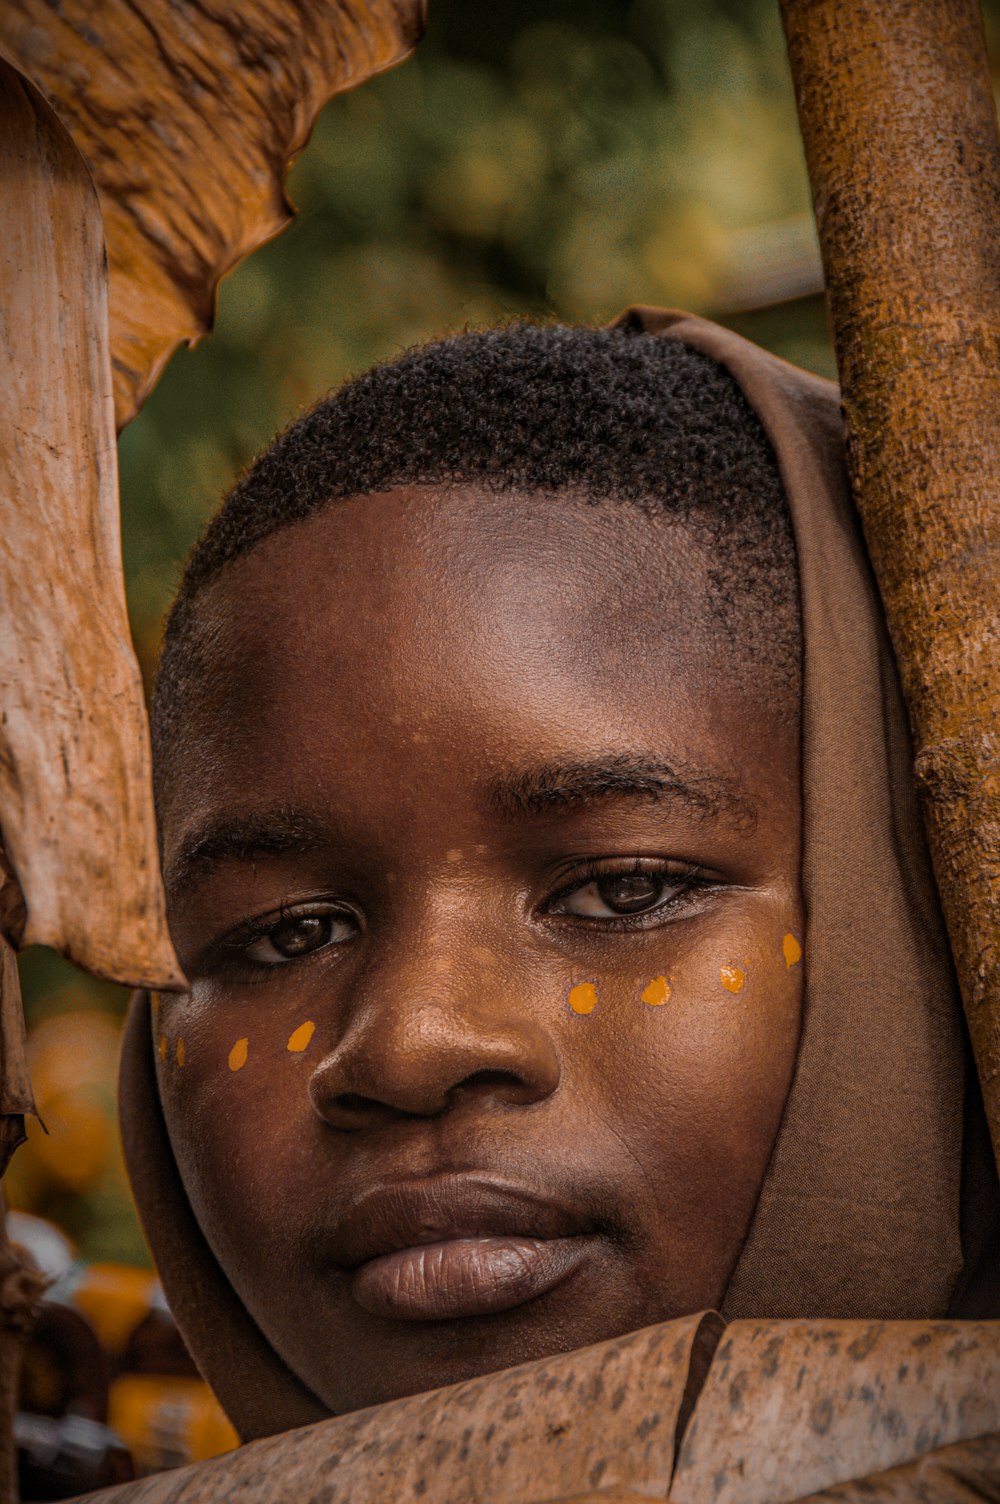 a young boy with yellow dots on his face